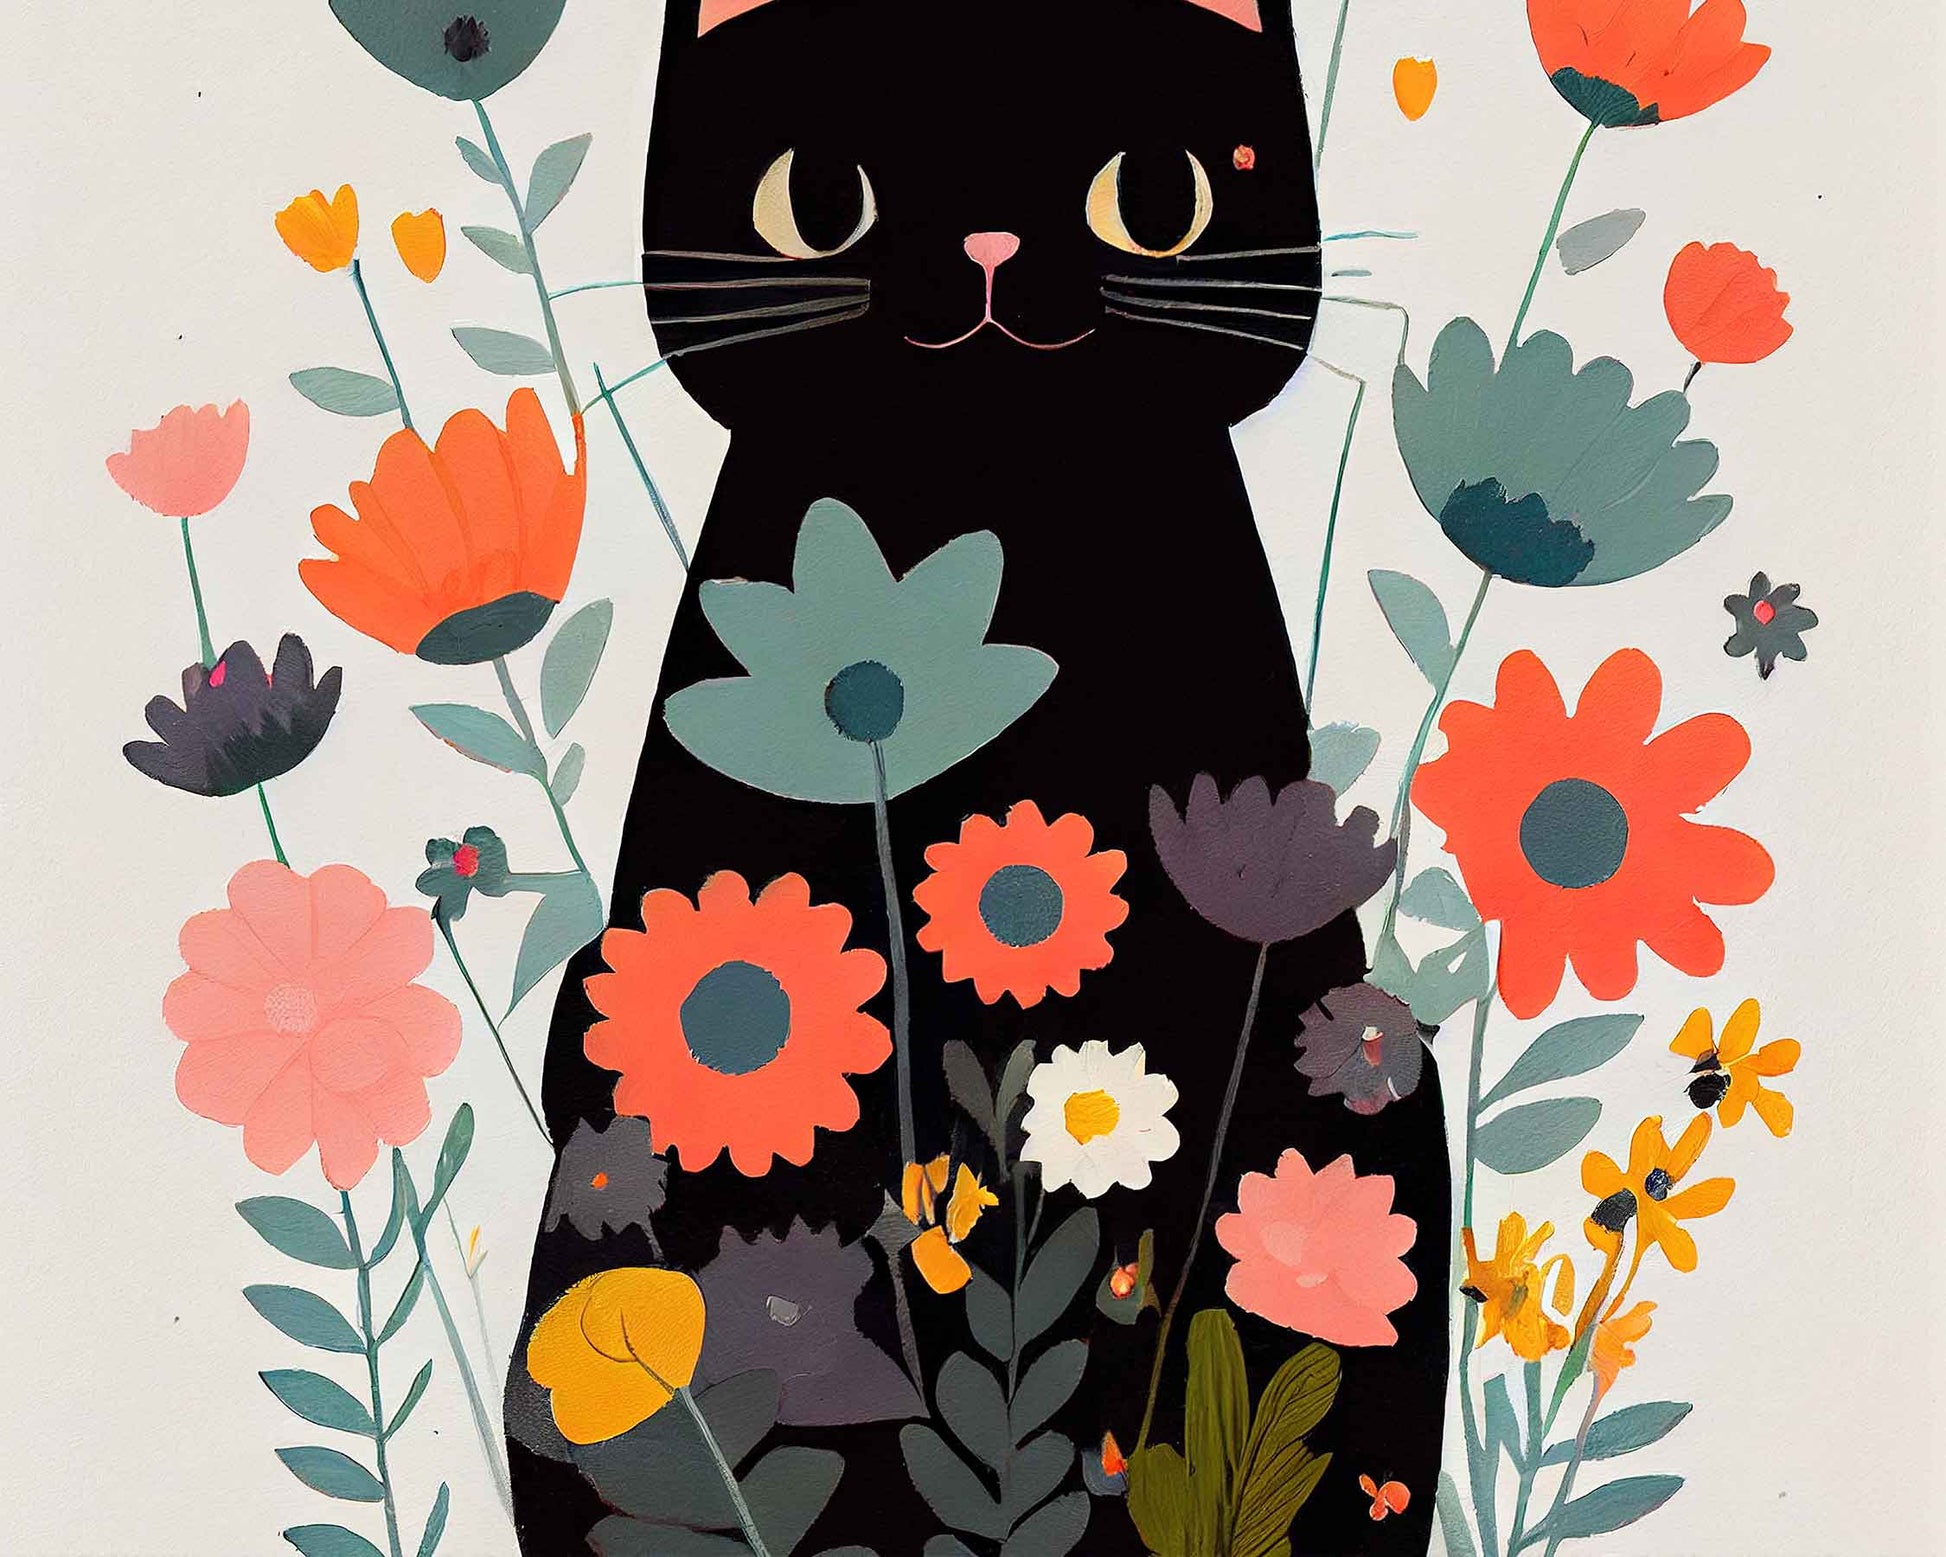 Framed Image of Cute Black Cat With Flowers Wall Art Poster Print